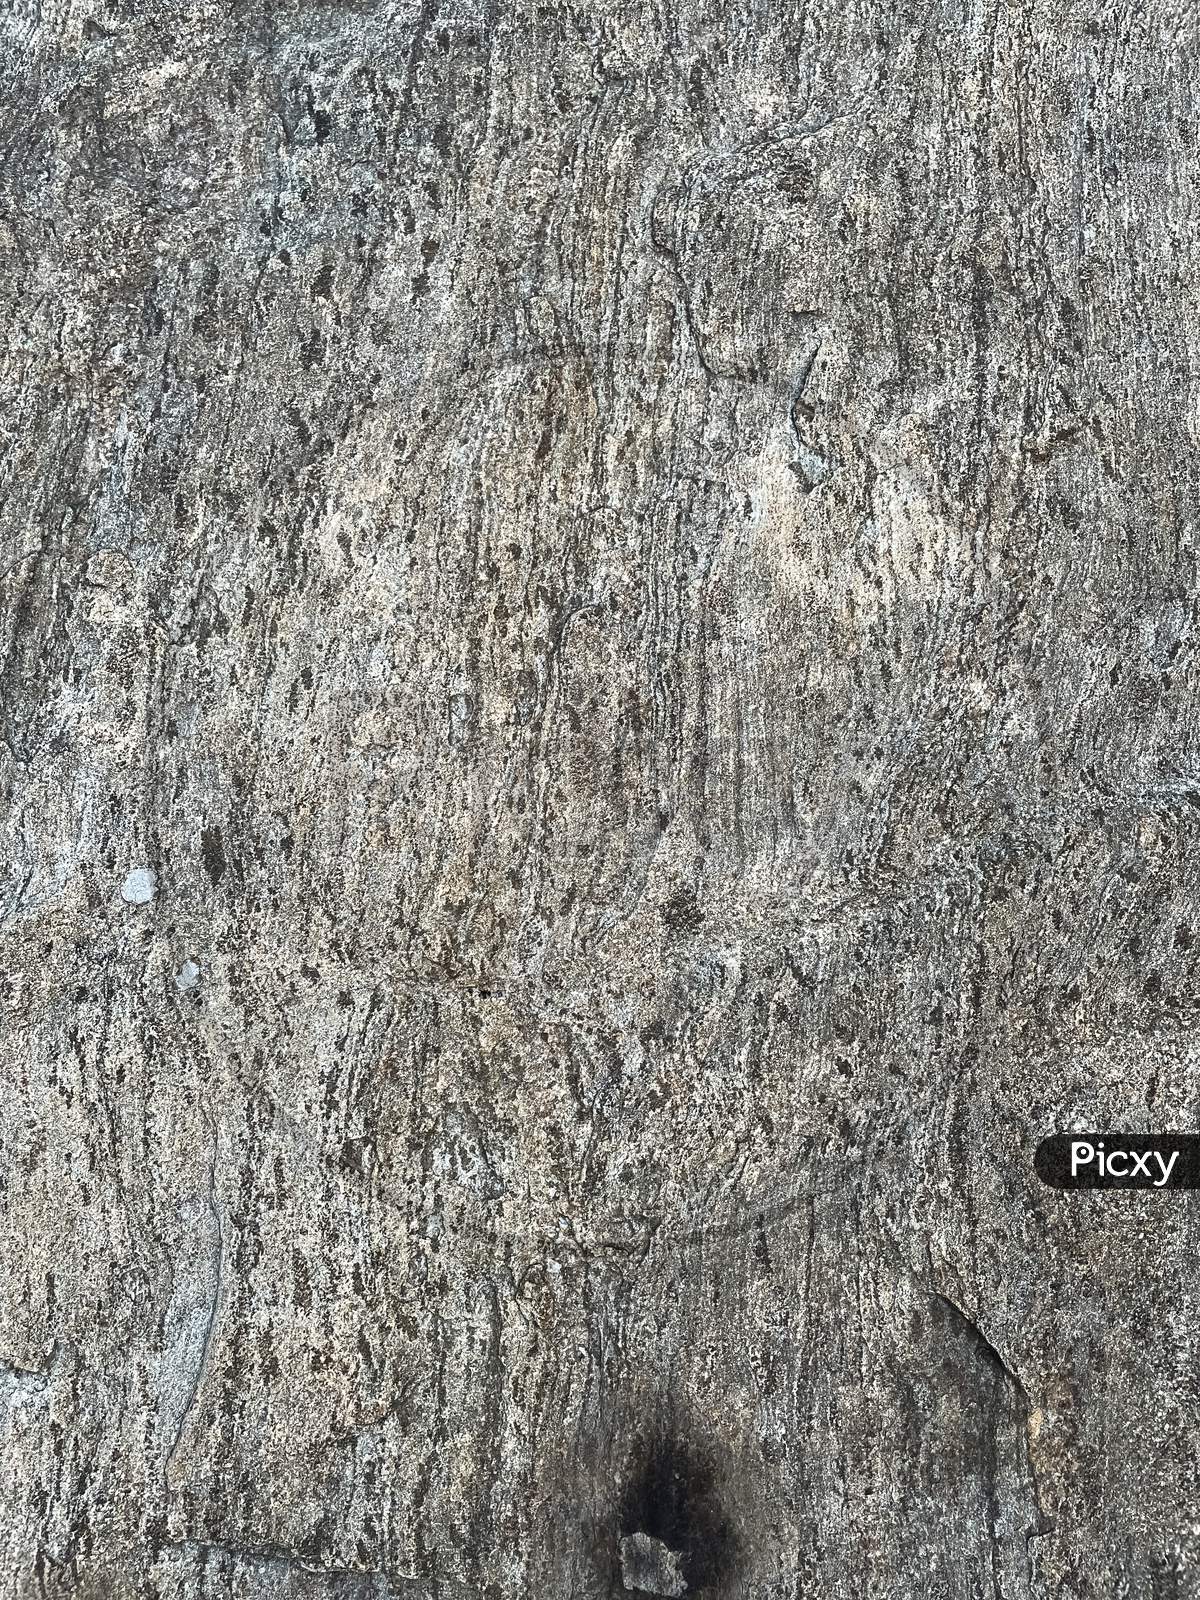 Image Of Seamless Natural Stone Texture.